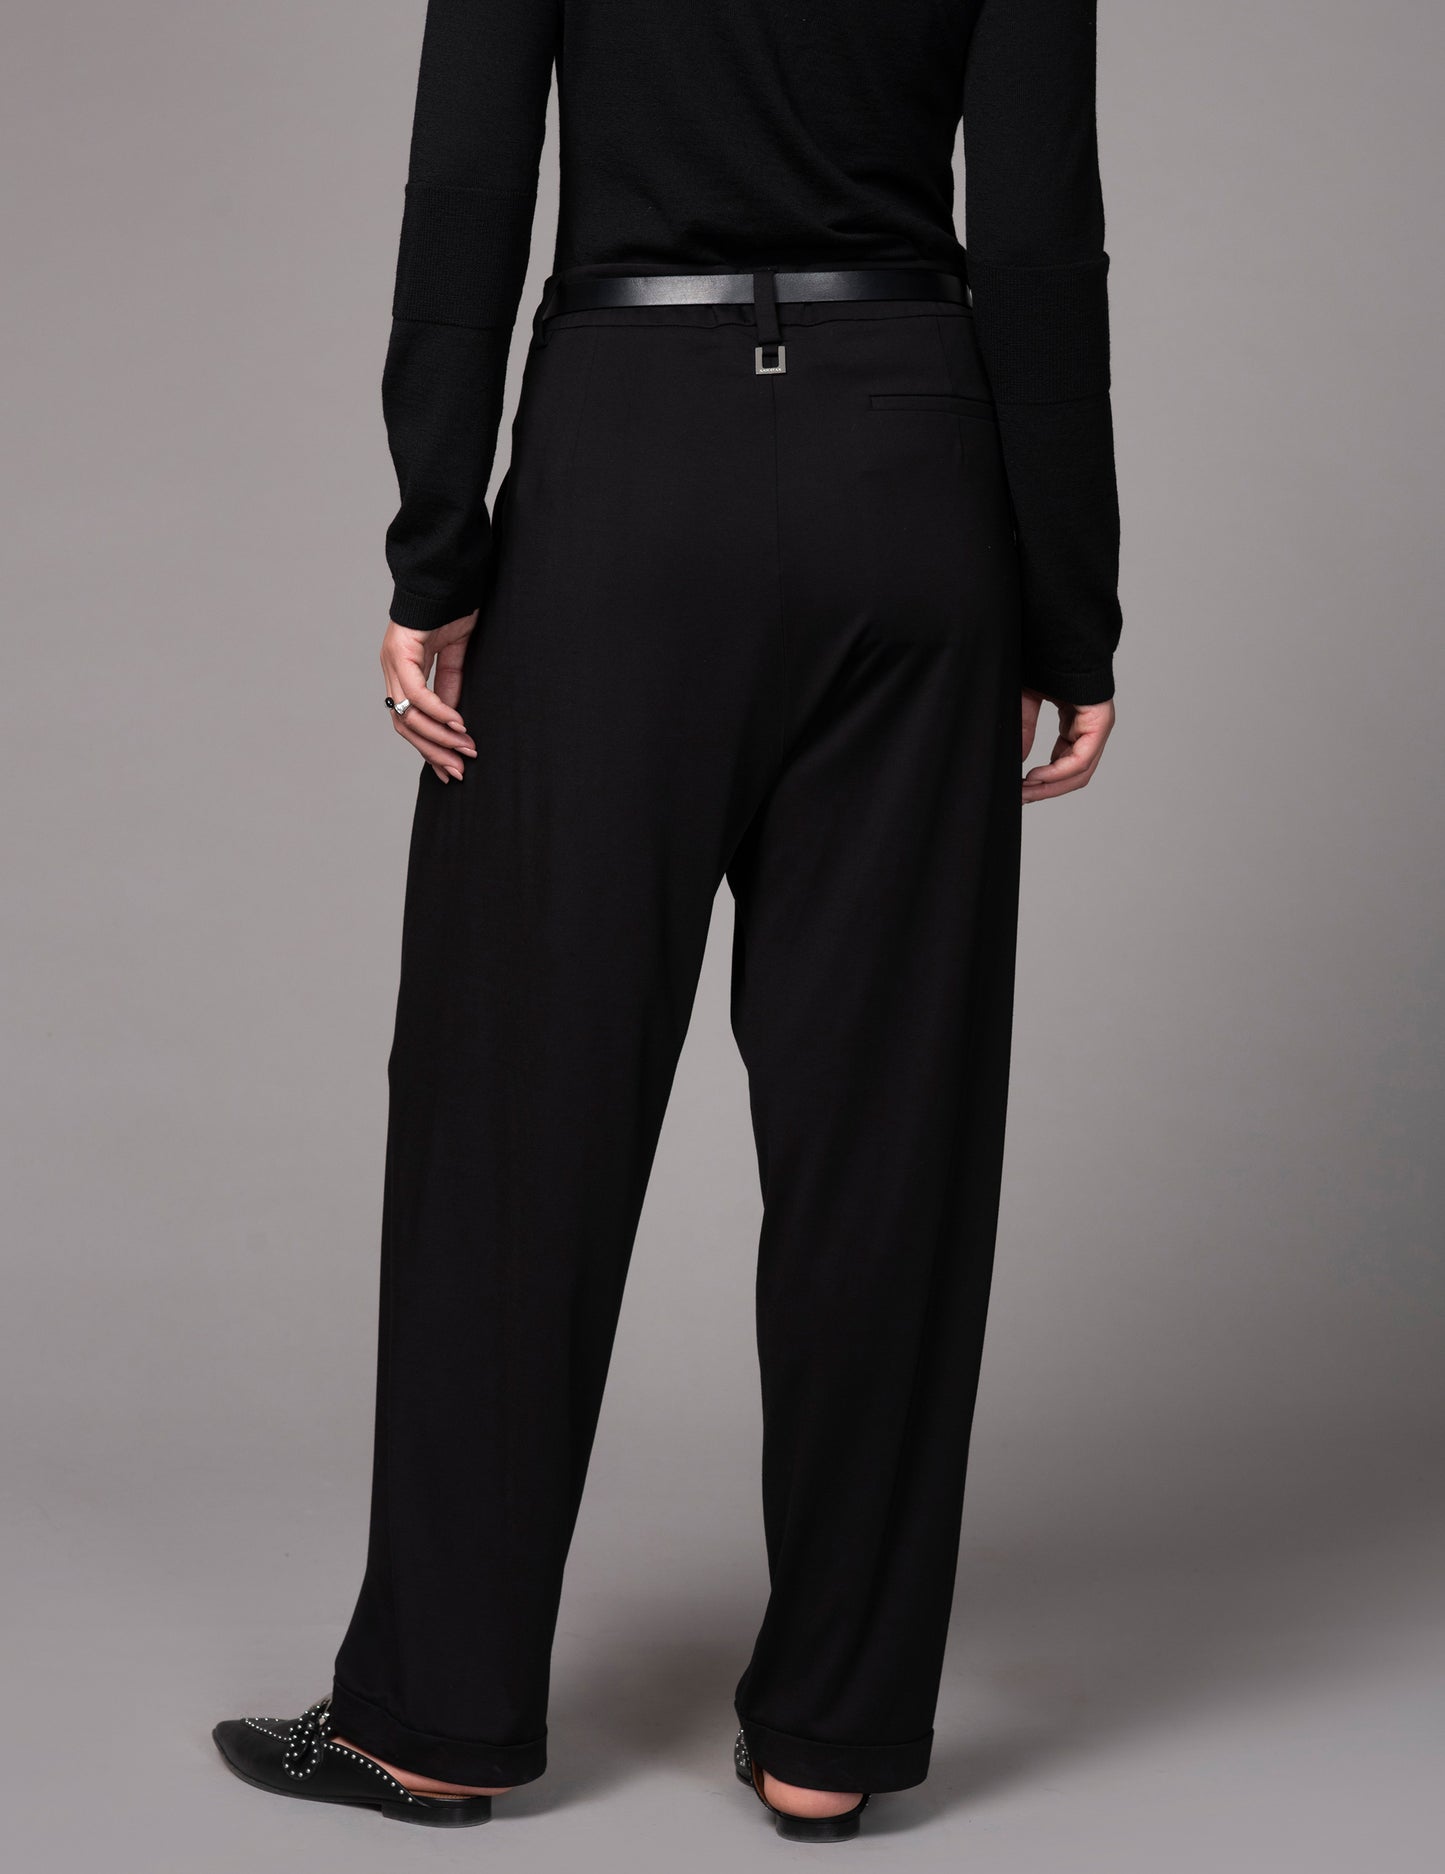 TAILORED JERSEY PANTS